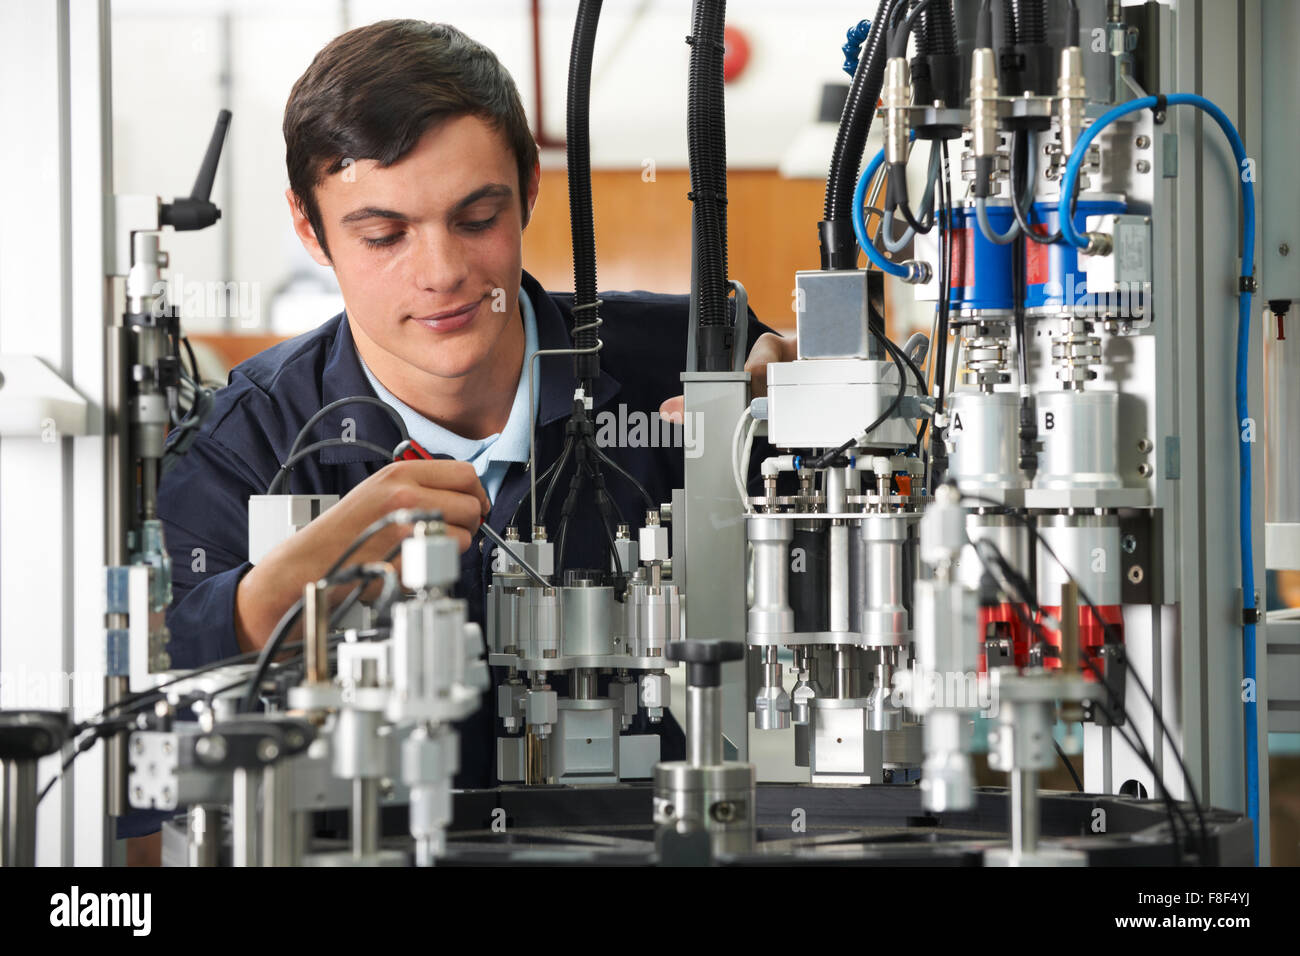 Trainee Engineer Working On Machinery In Factory Stock Photo